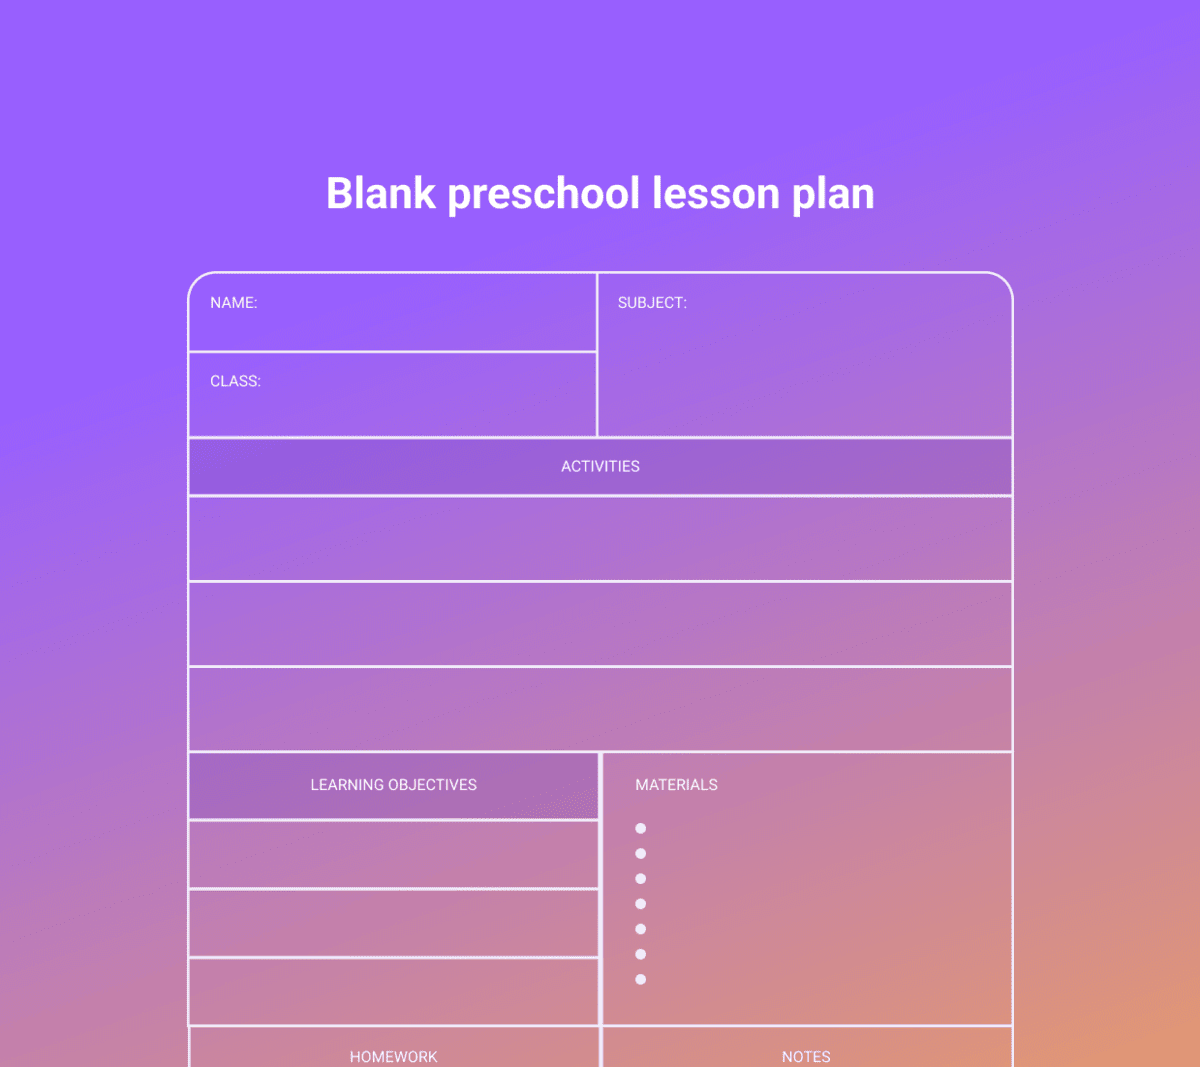 An example of a blank preschool lesson plan template